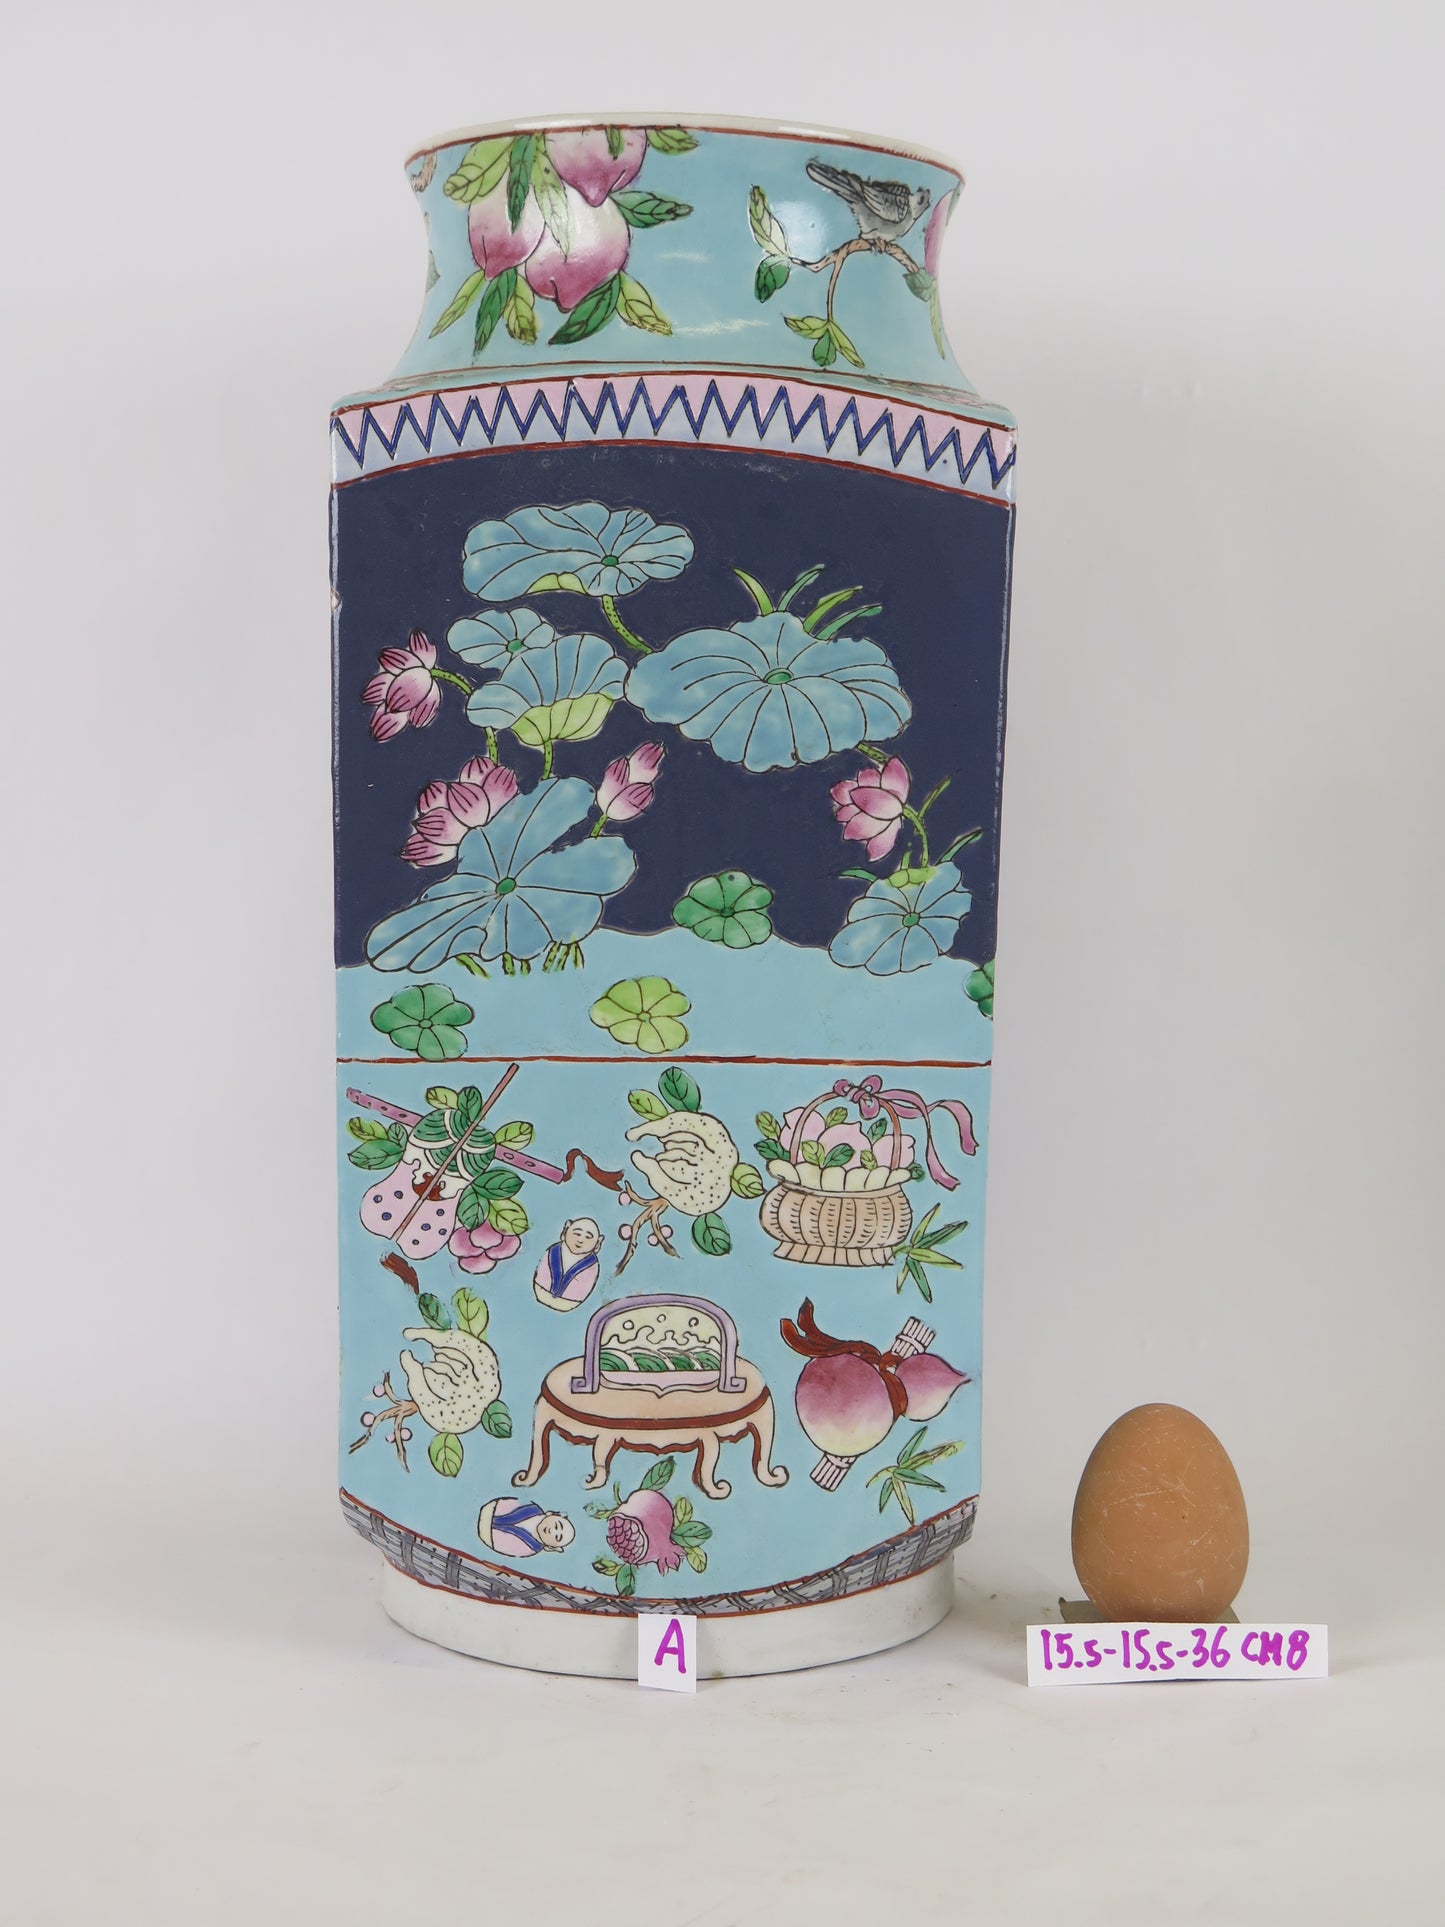 Collectible vintage Chinese ceramic vase Original China high quality CM8 a